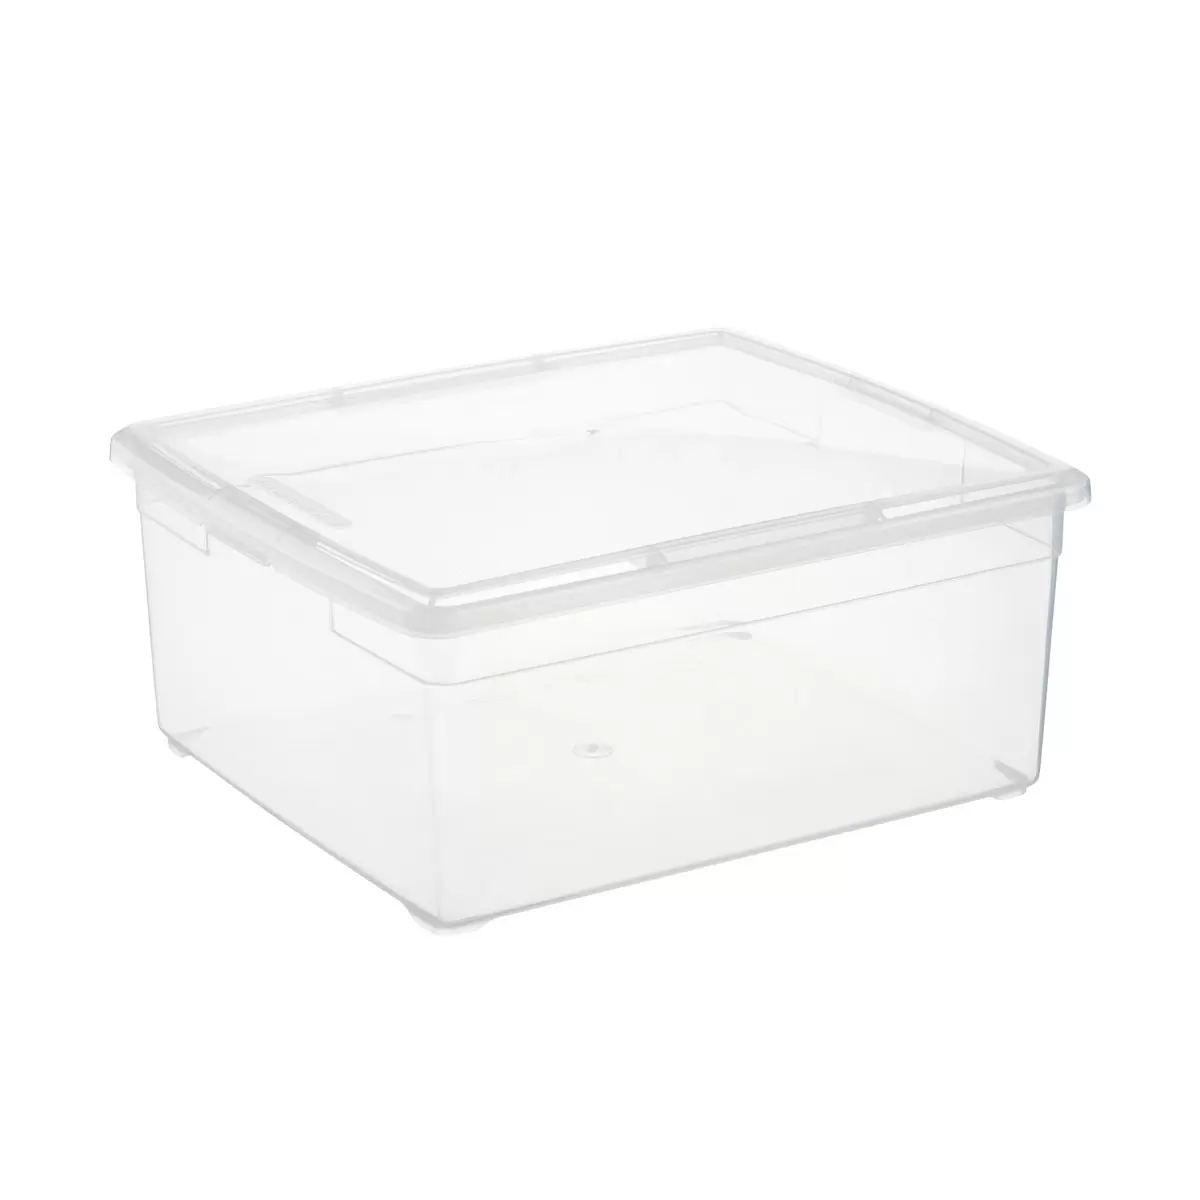 Clear Plastic Storage Boxes - Our Clear 